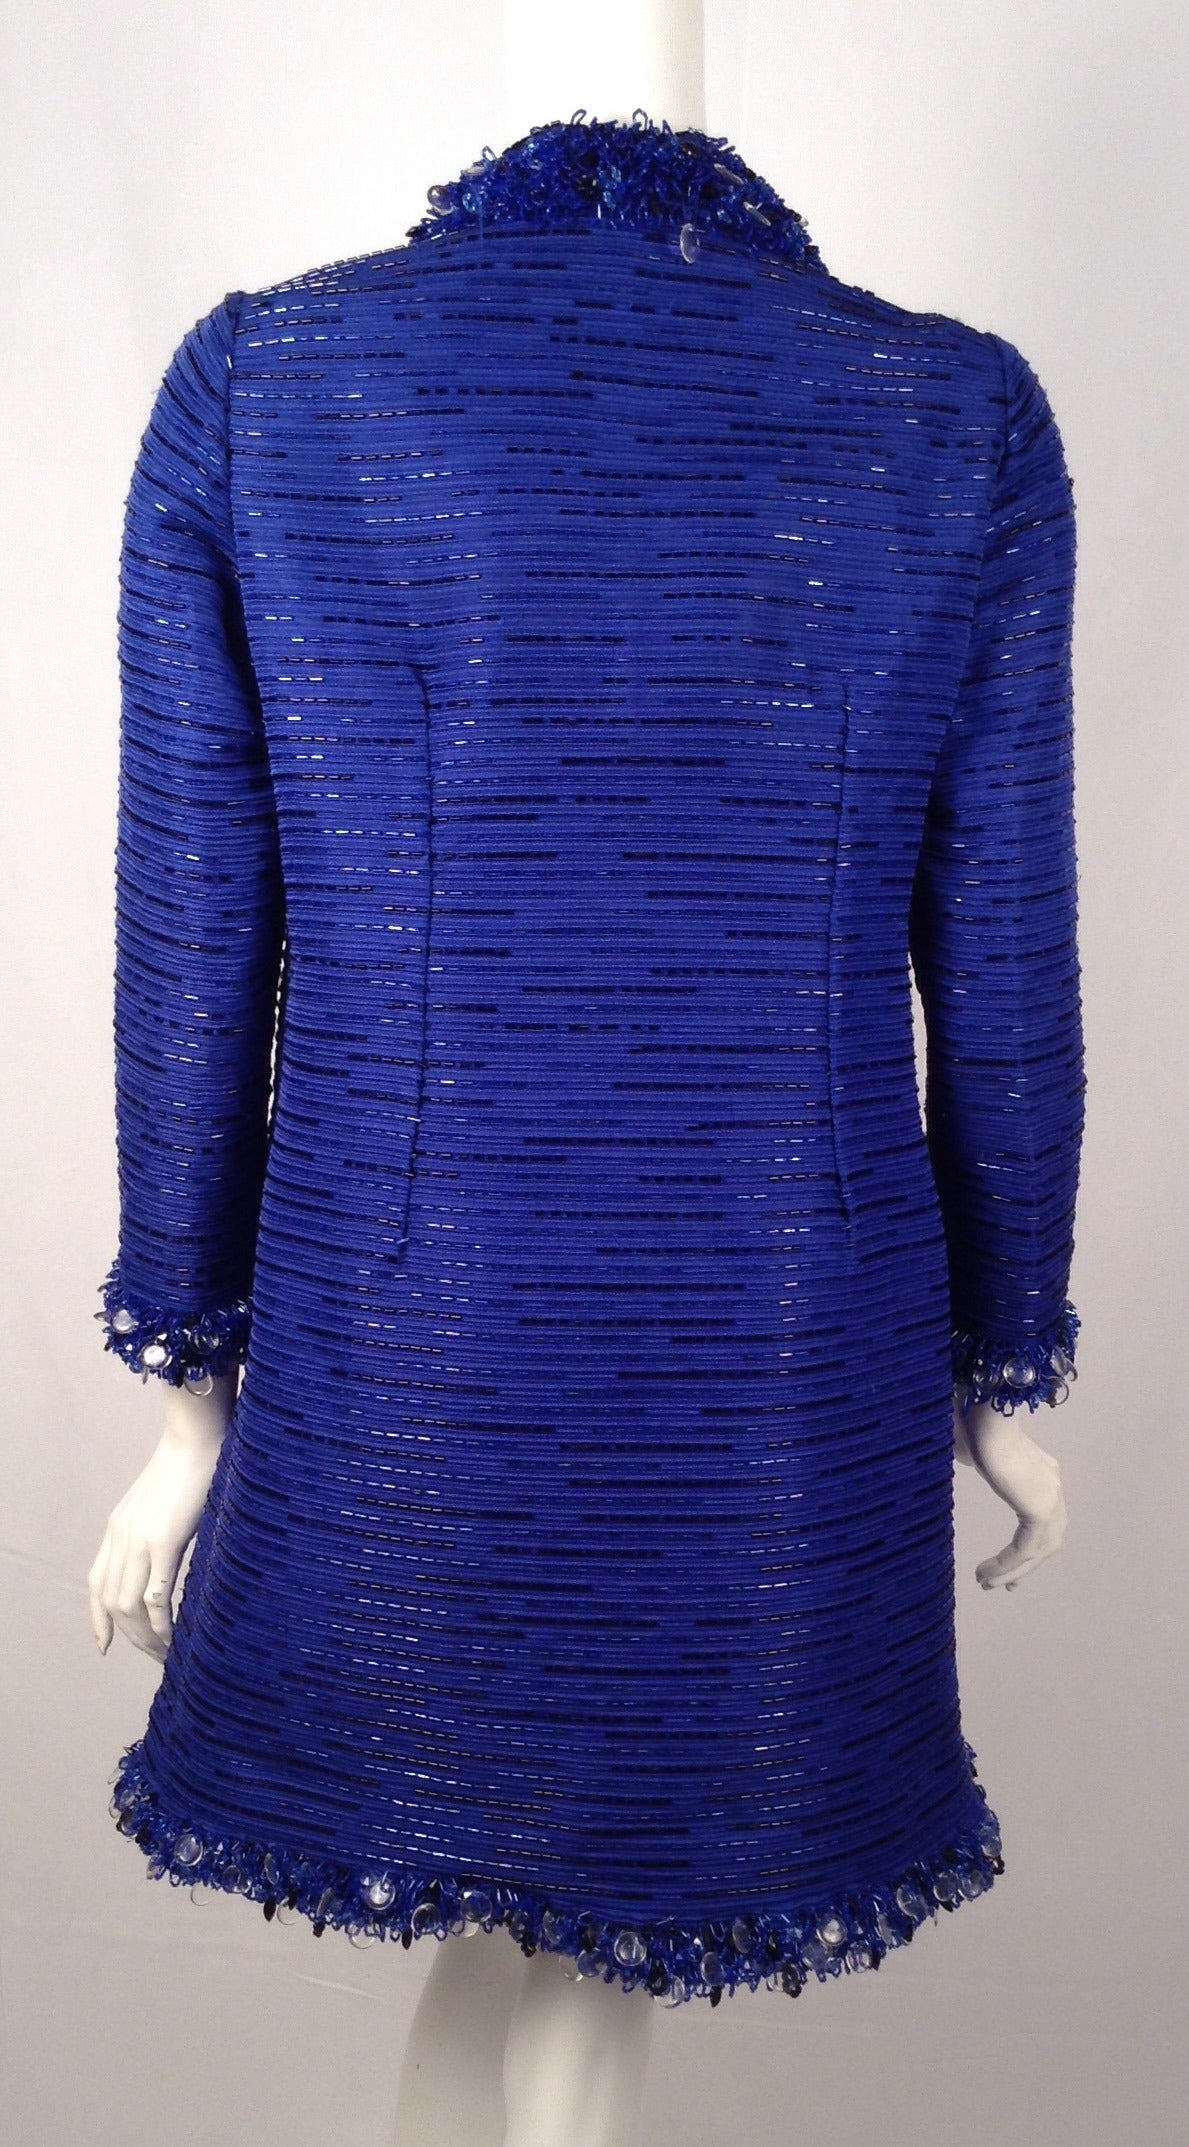 Vintage Roberto Capucci Beaded Cocktail Dress is an excellent example of haute couture techniques that defined fashion in Paris and Rome in the 1950's and 1960's.  As is evident in this dress, Roberto Capucci was greatly influenced by shapes,